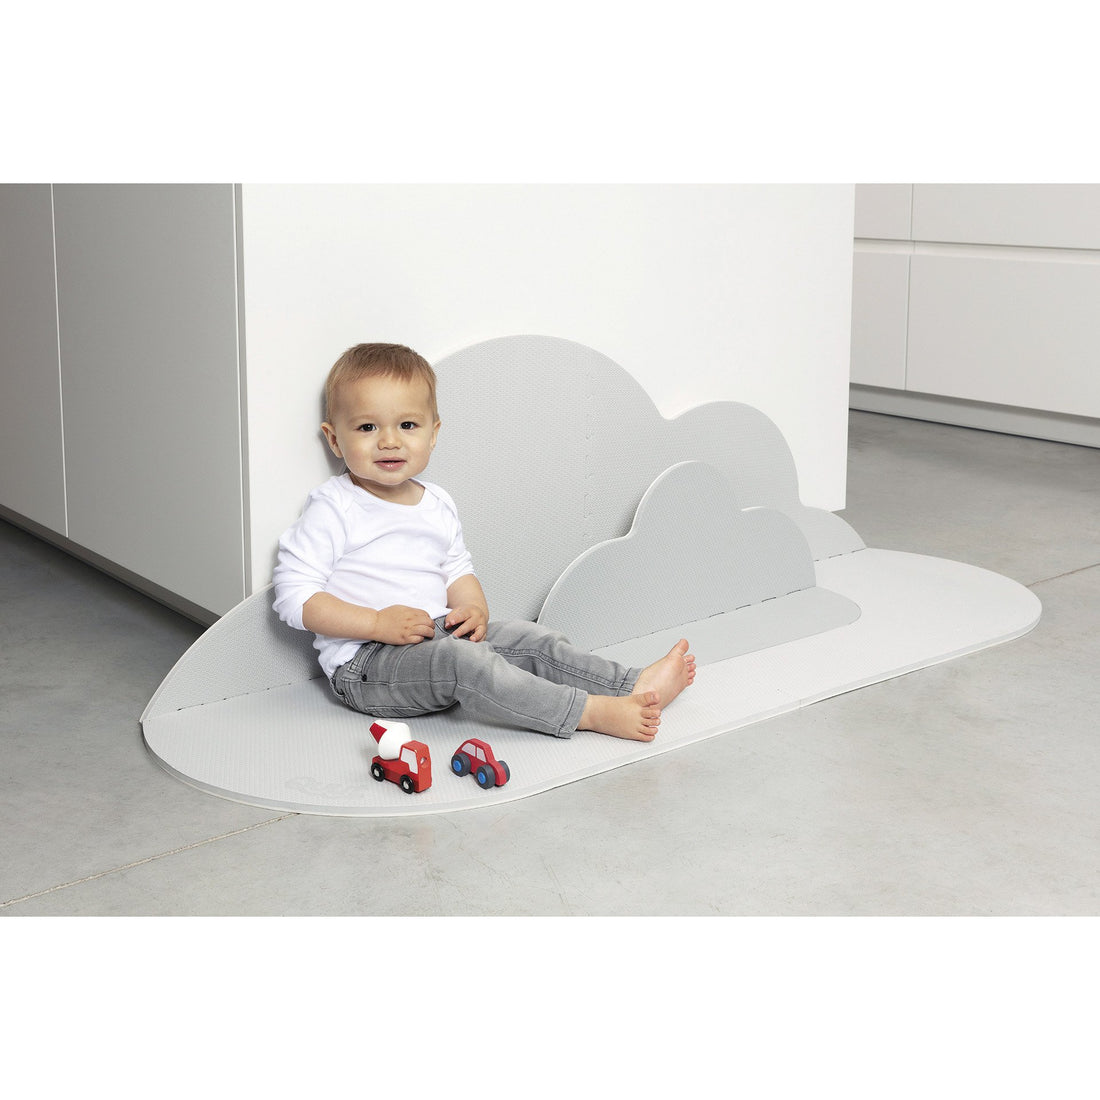 quut-playmat-head-in-the-clouds-s-145-x-90cm-pearl-grey- (11)